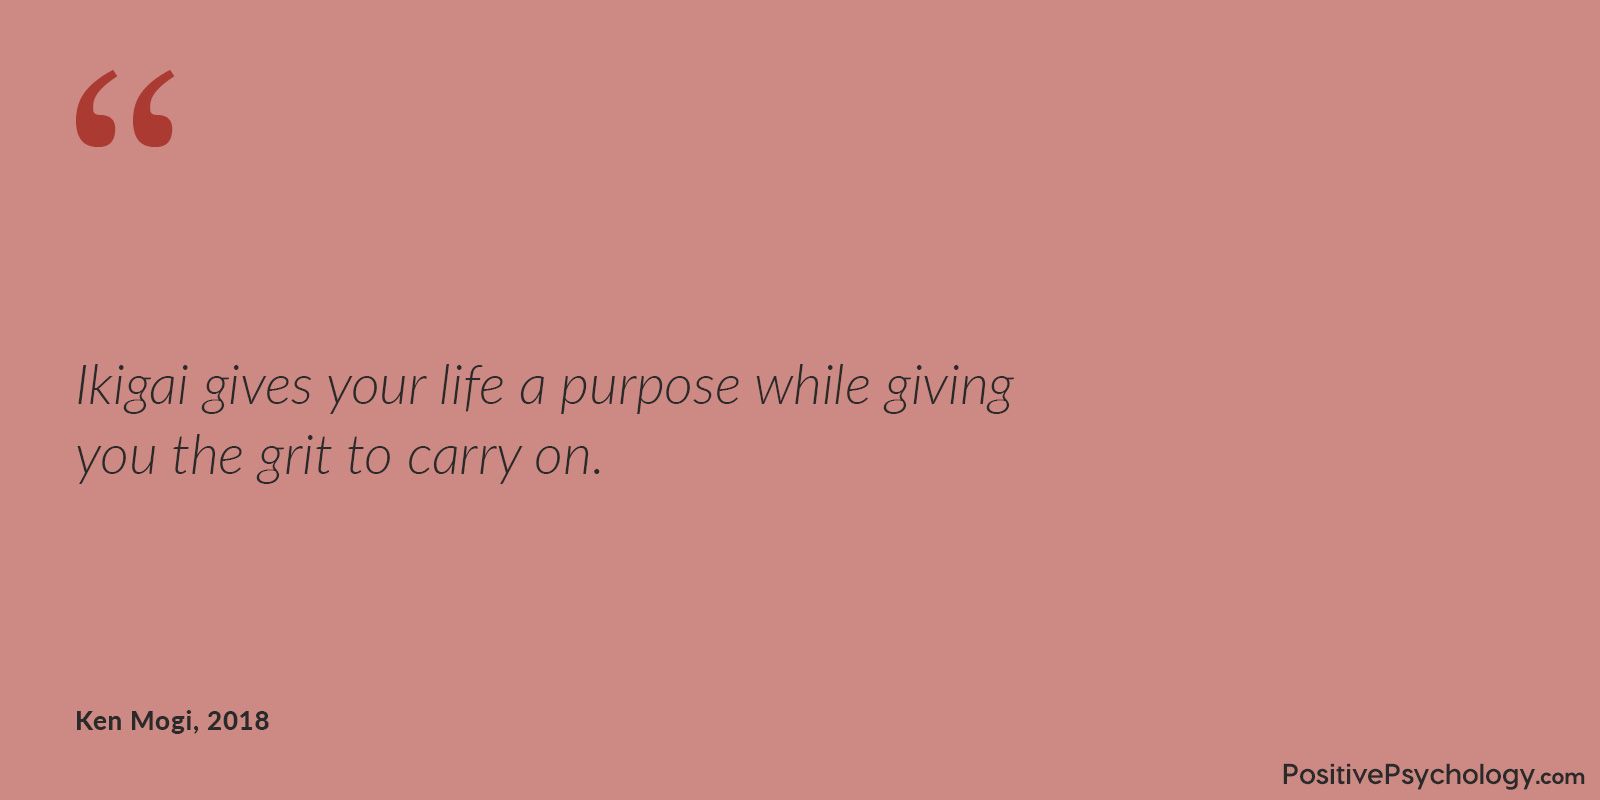 Gives your life purpose